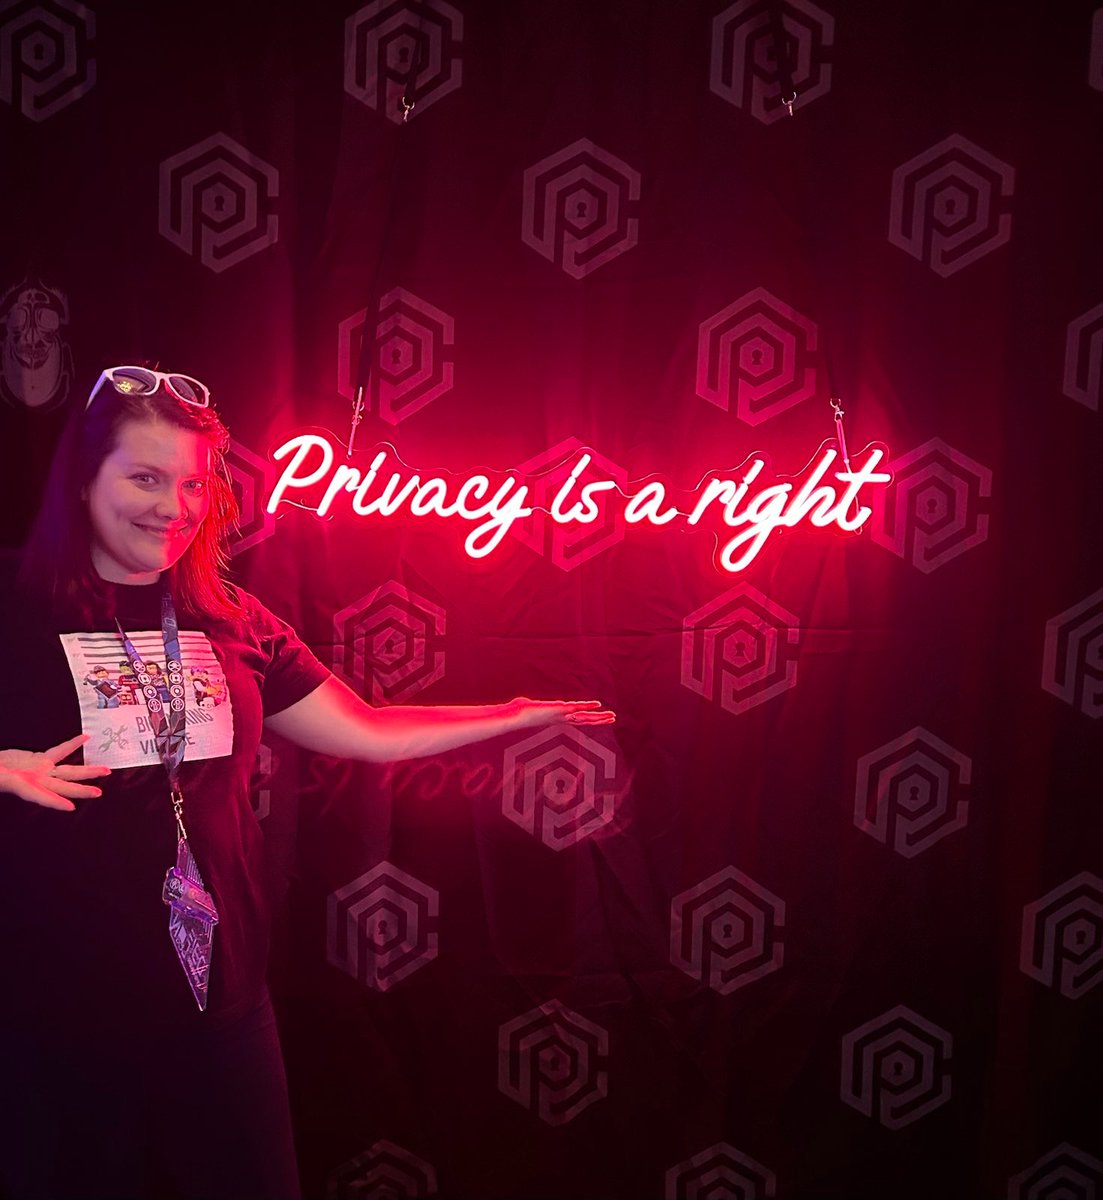 Health privacy is a right.

If you agree pass it on.  #DEFCON31